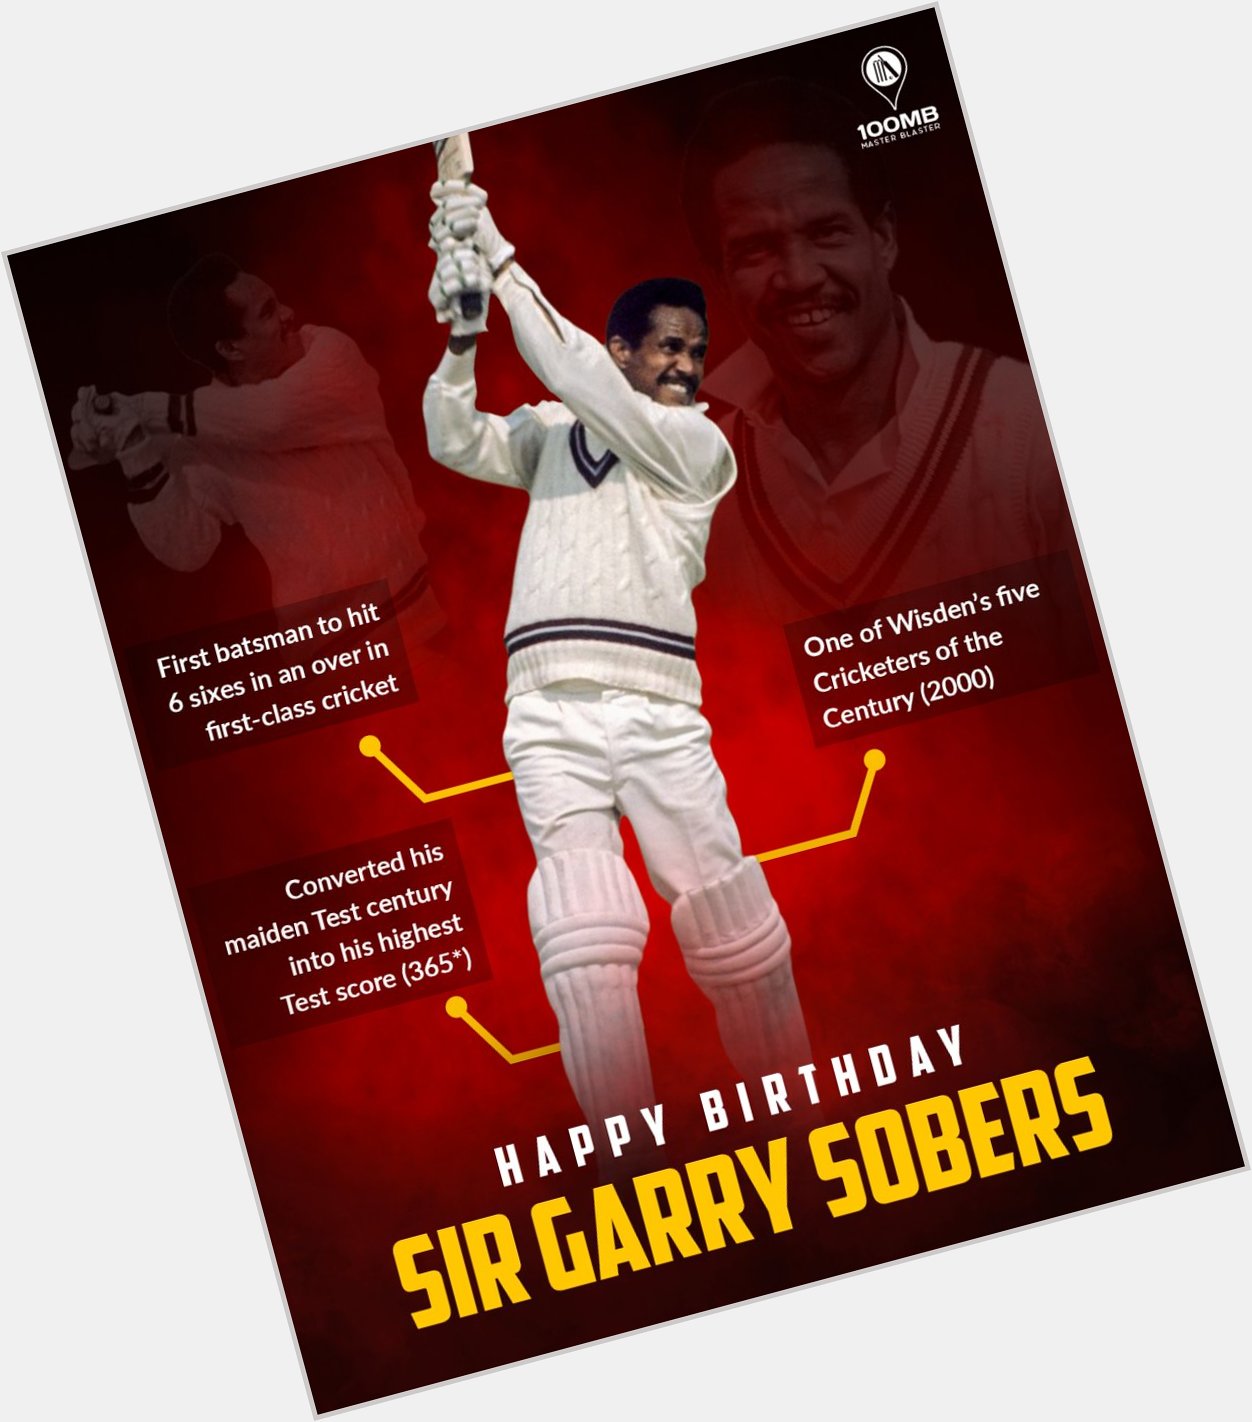 Happy birthday to one of the greatest all-rounders in cricketing history, Sir Garfield Sobers! 